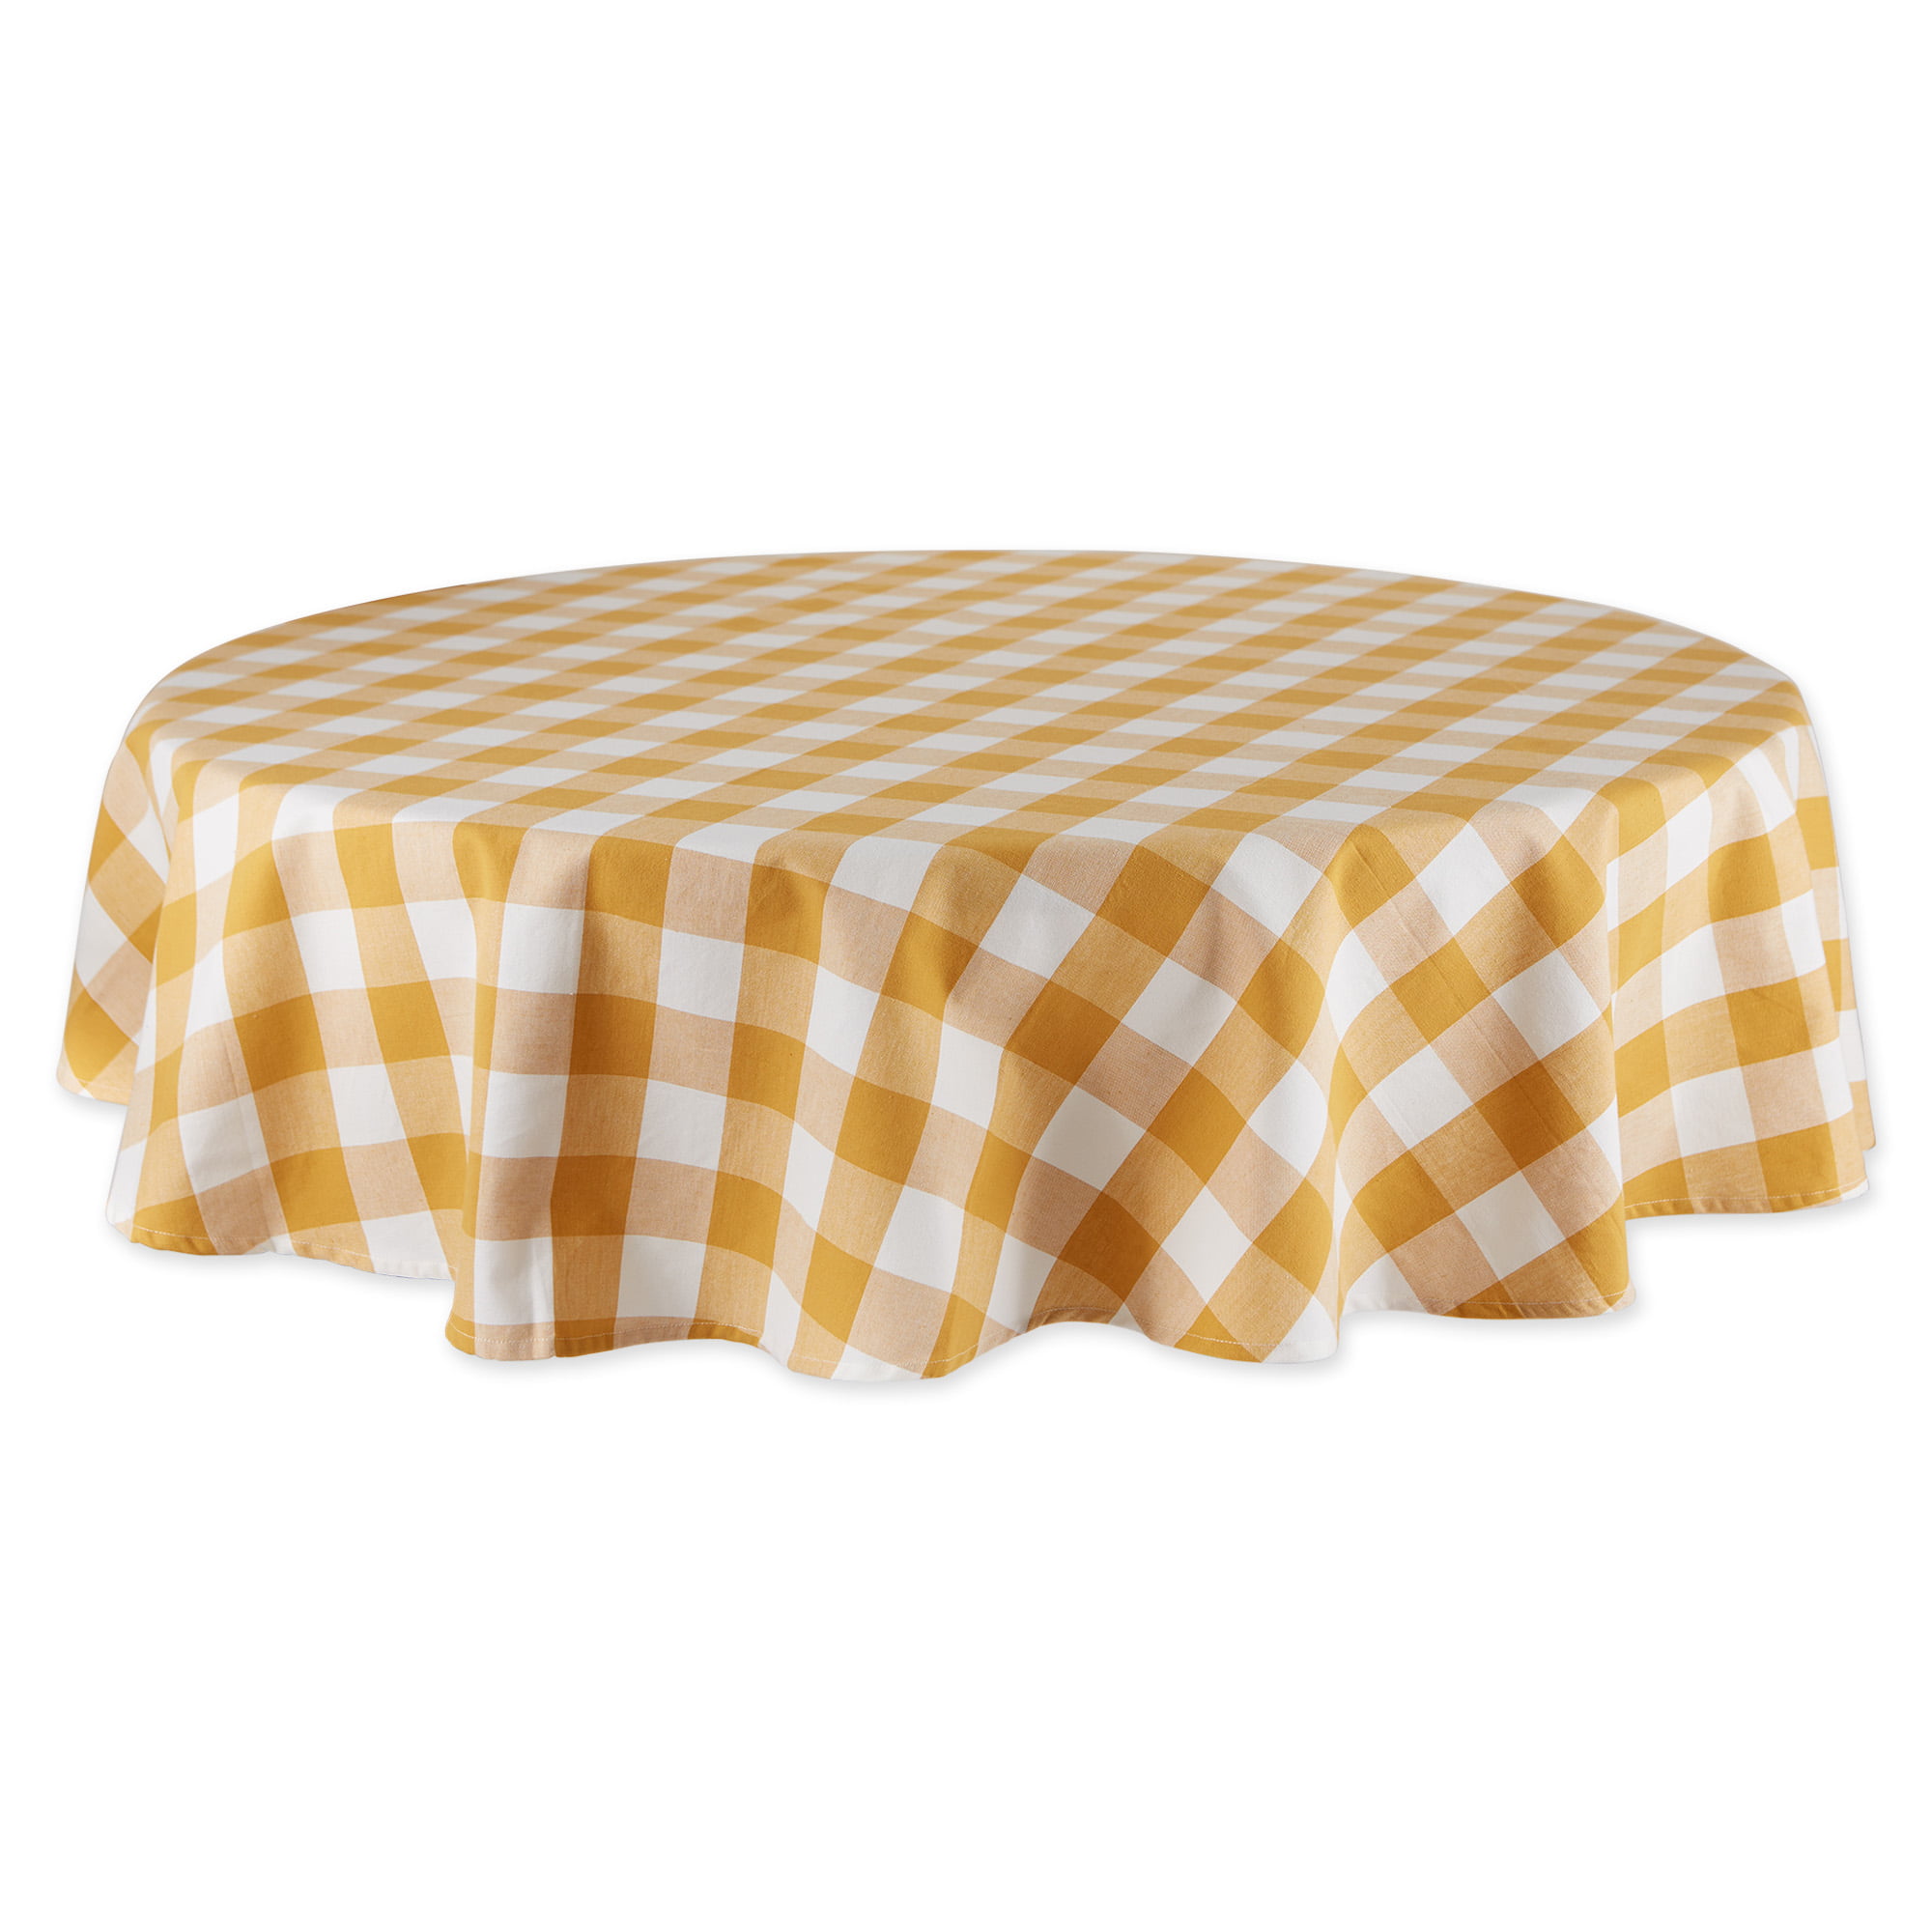 NEW SOUTHERN LIVING PLAID TABLECLOTH BROWN TAN YELLOW PLAID 70" ROUND NEW 